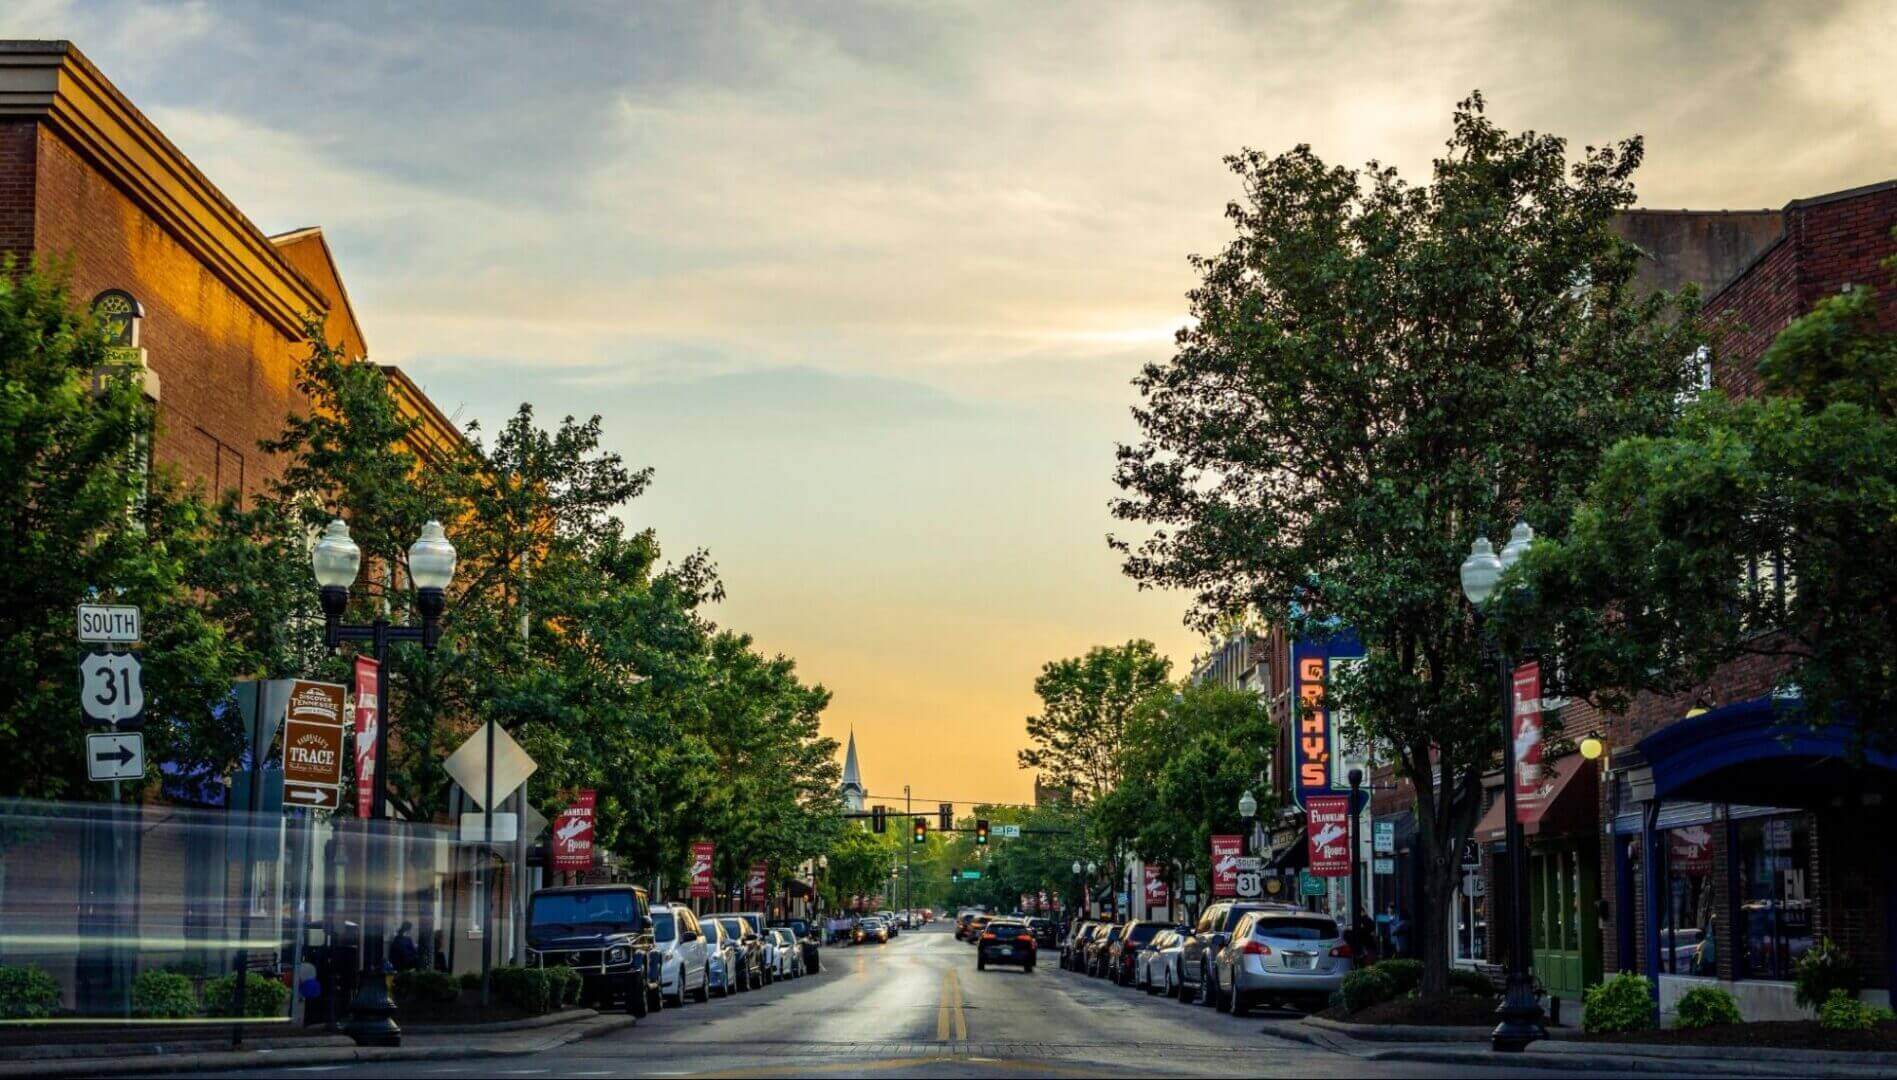 17. Franklin, Tennessee